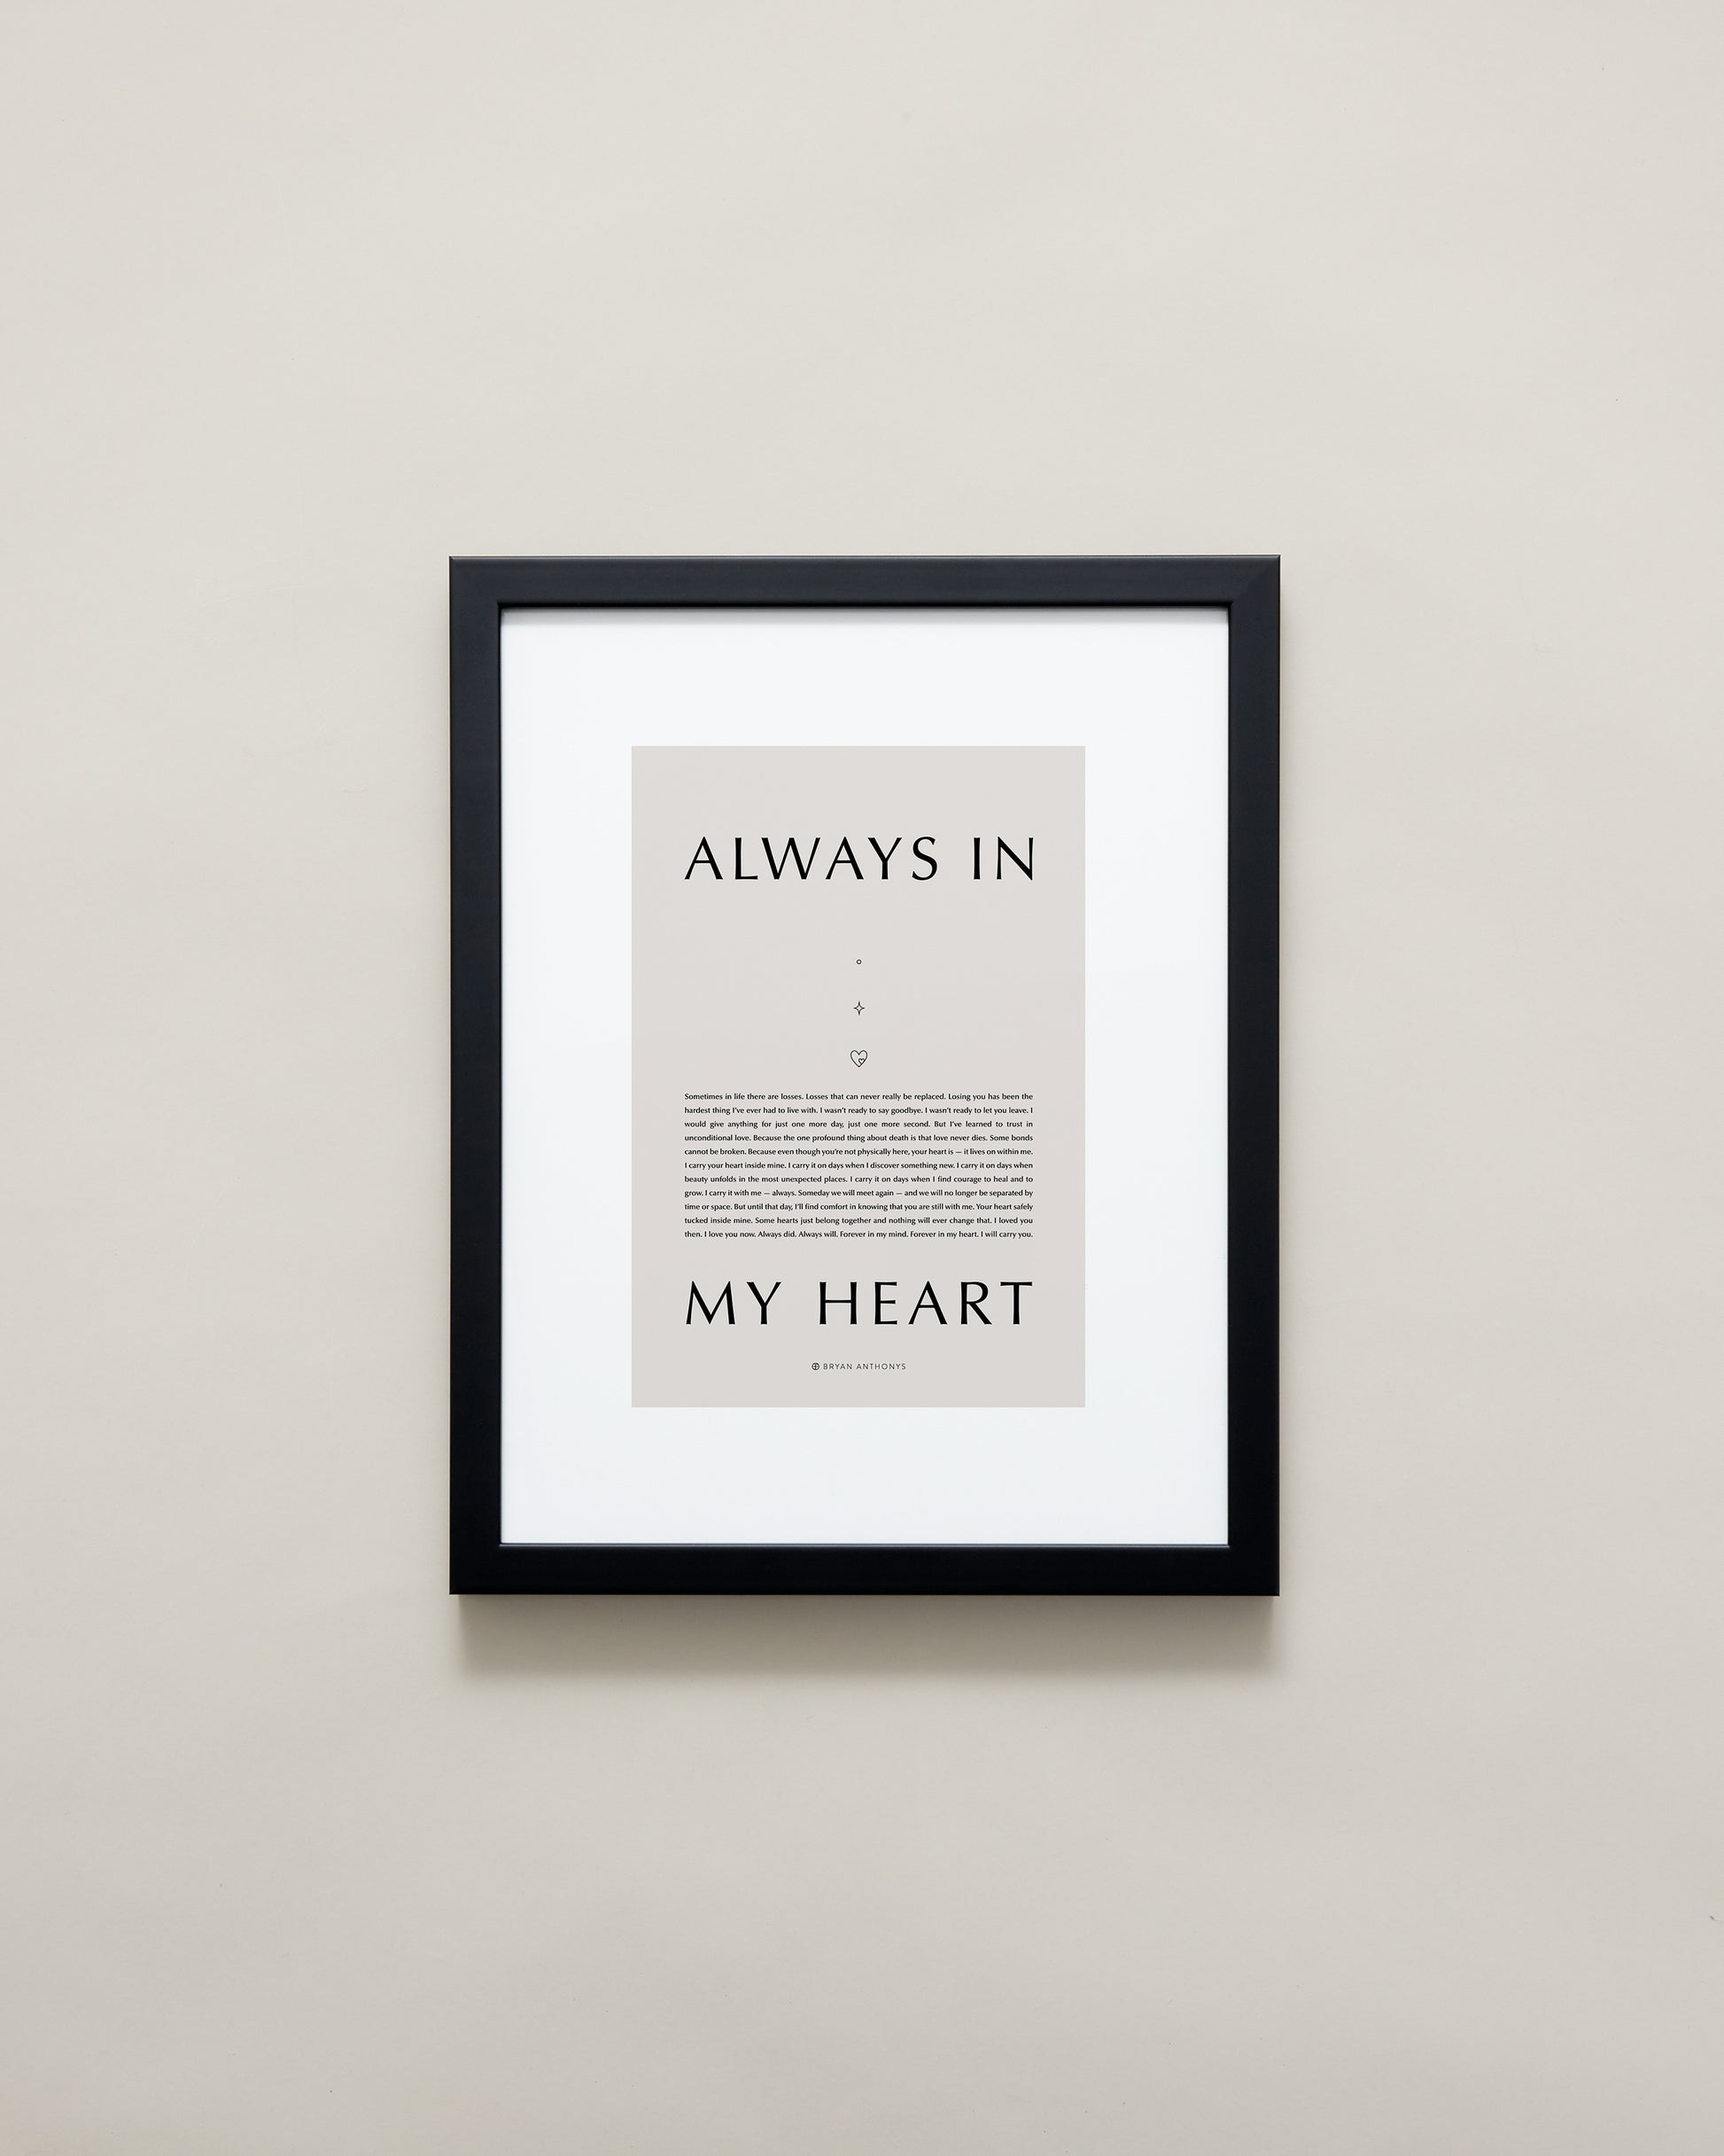 Bryan Anthonys Home Decor Purposeful Prints Always In My Heart Iconic Framed Print Tan Art With Black Frame 11x14